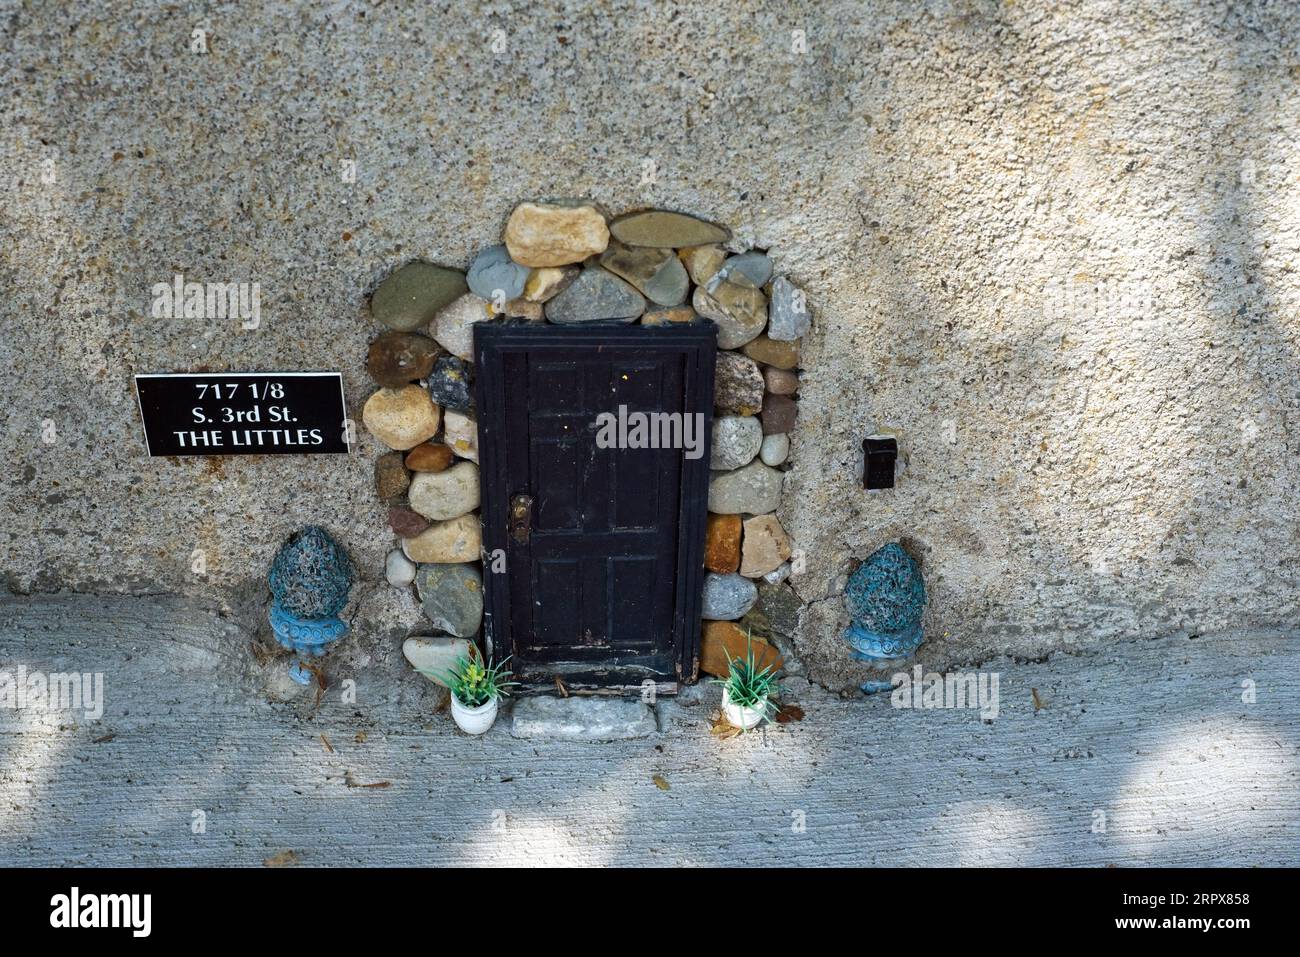 A mouse-sized doorway based on the fictional character Stuart Little adds a bit of whimsy in the German Village n Stock Photo